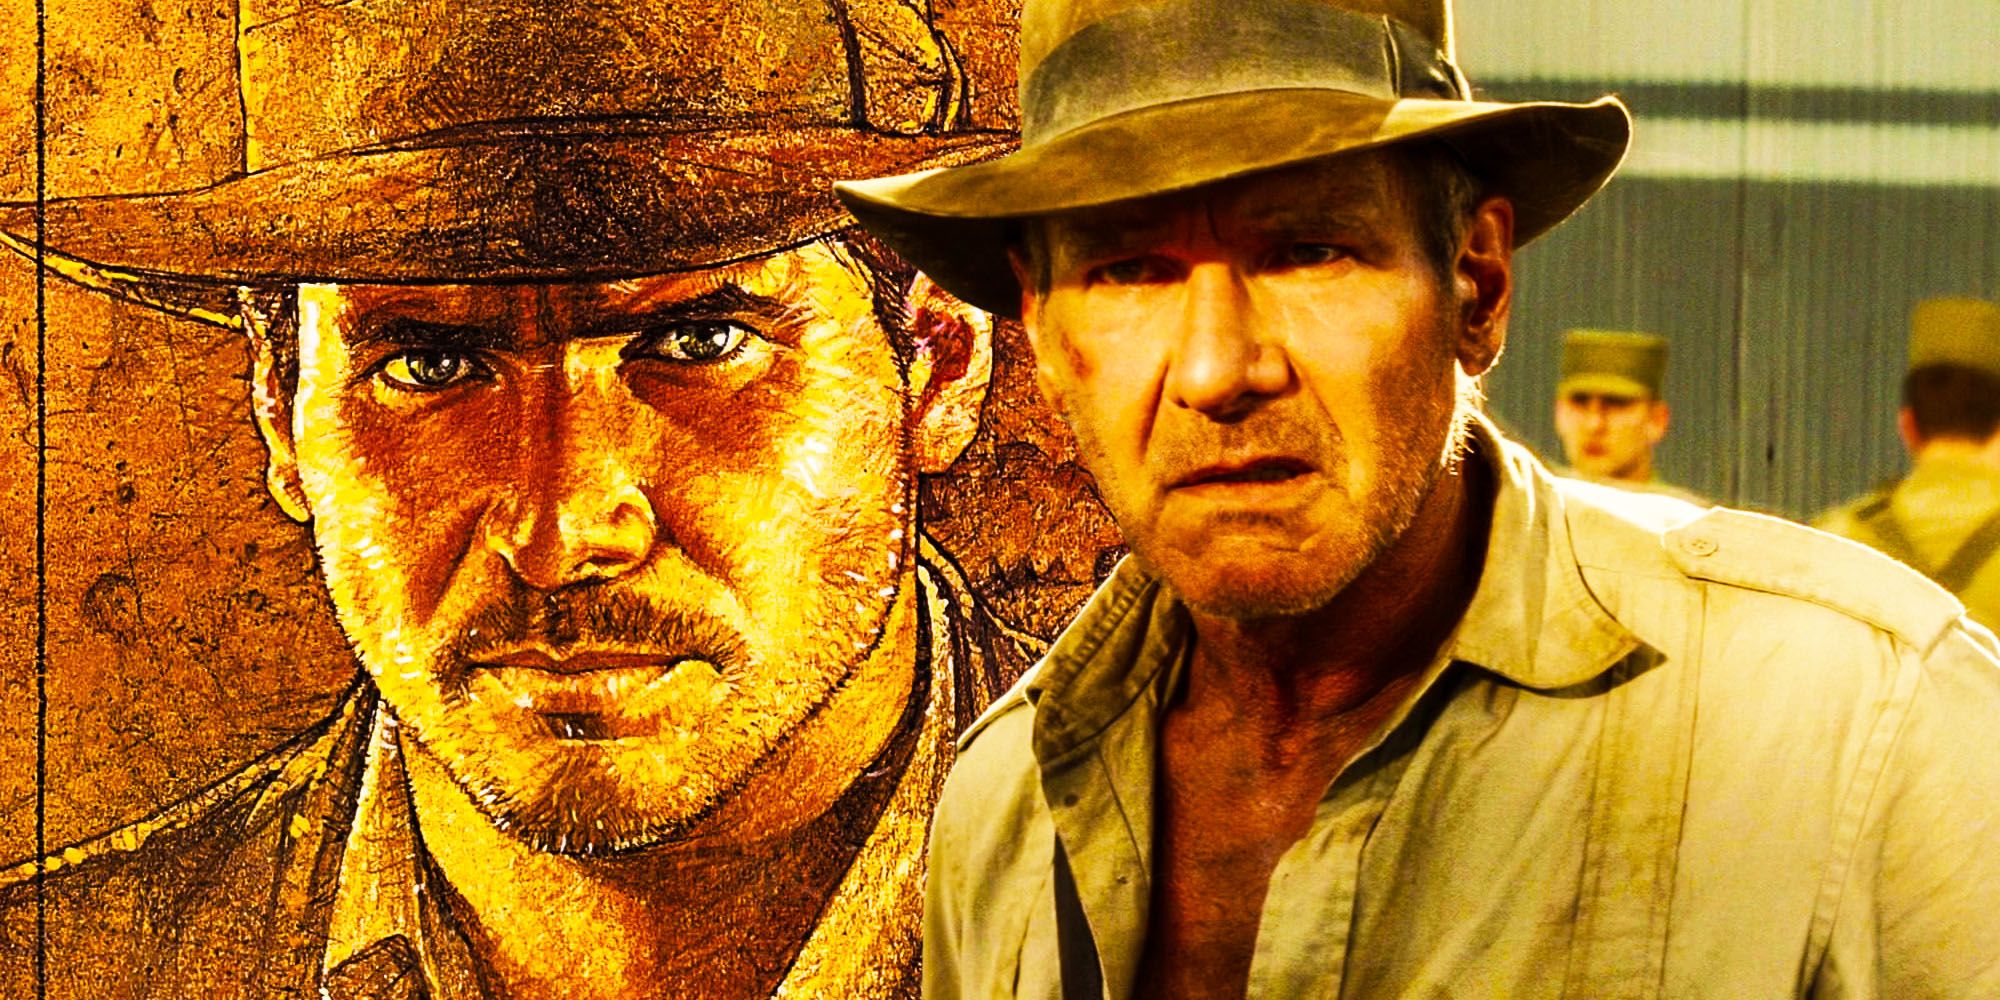 The Indiana Jones Franchise Needs A Reboot (But Shouldn’t Get One)